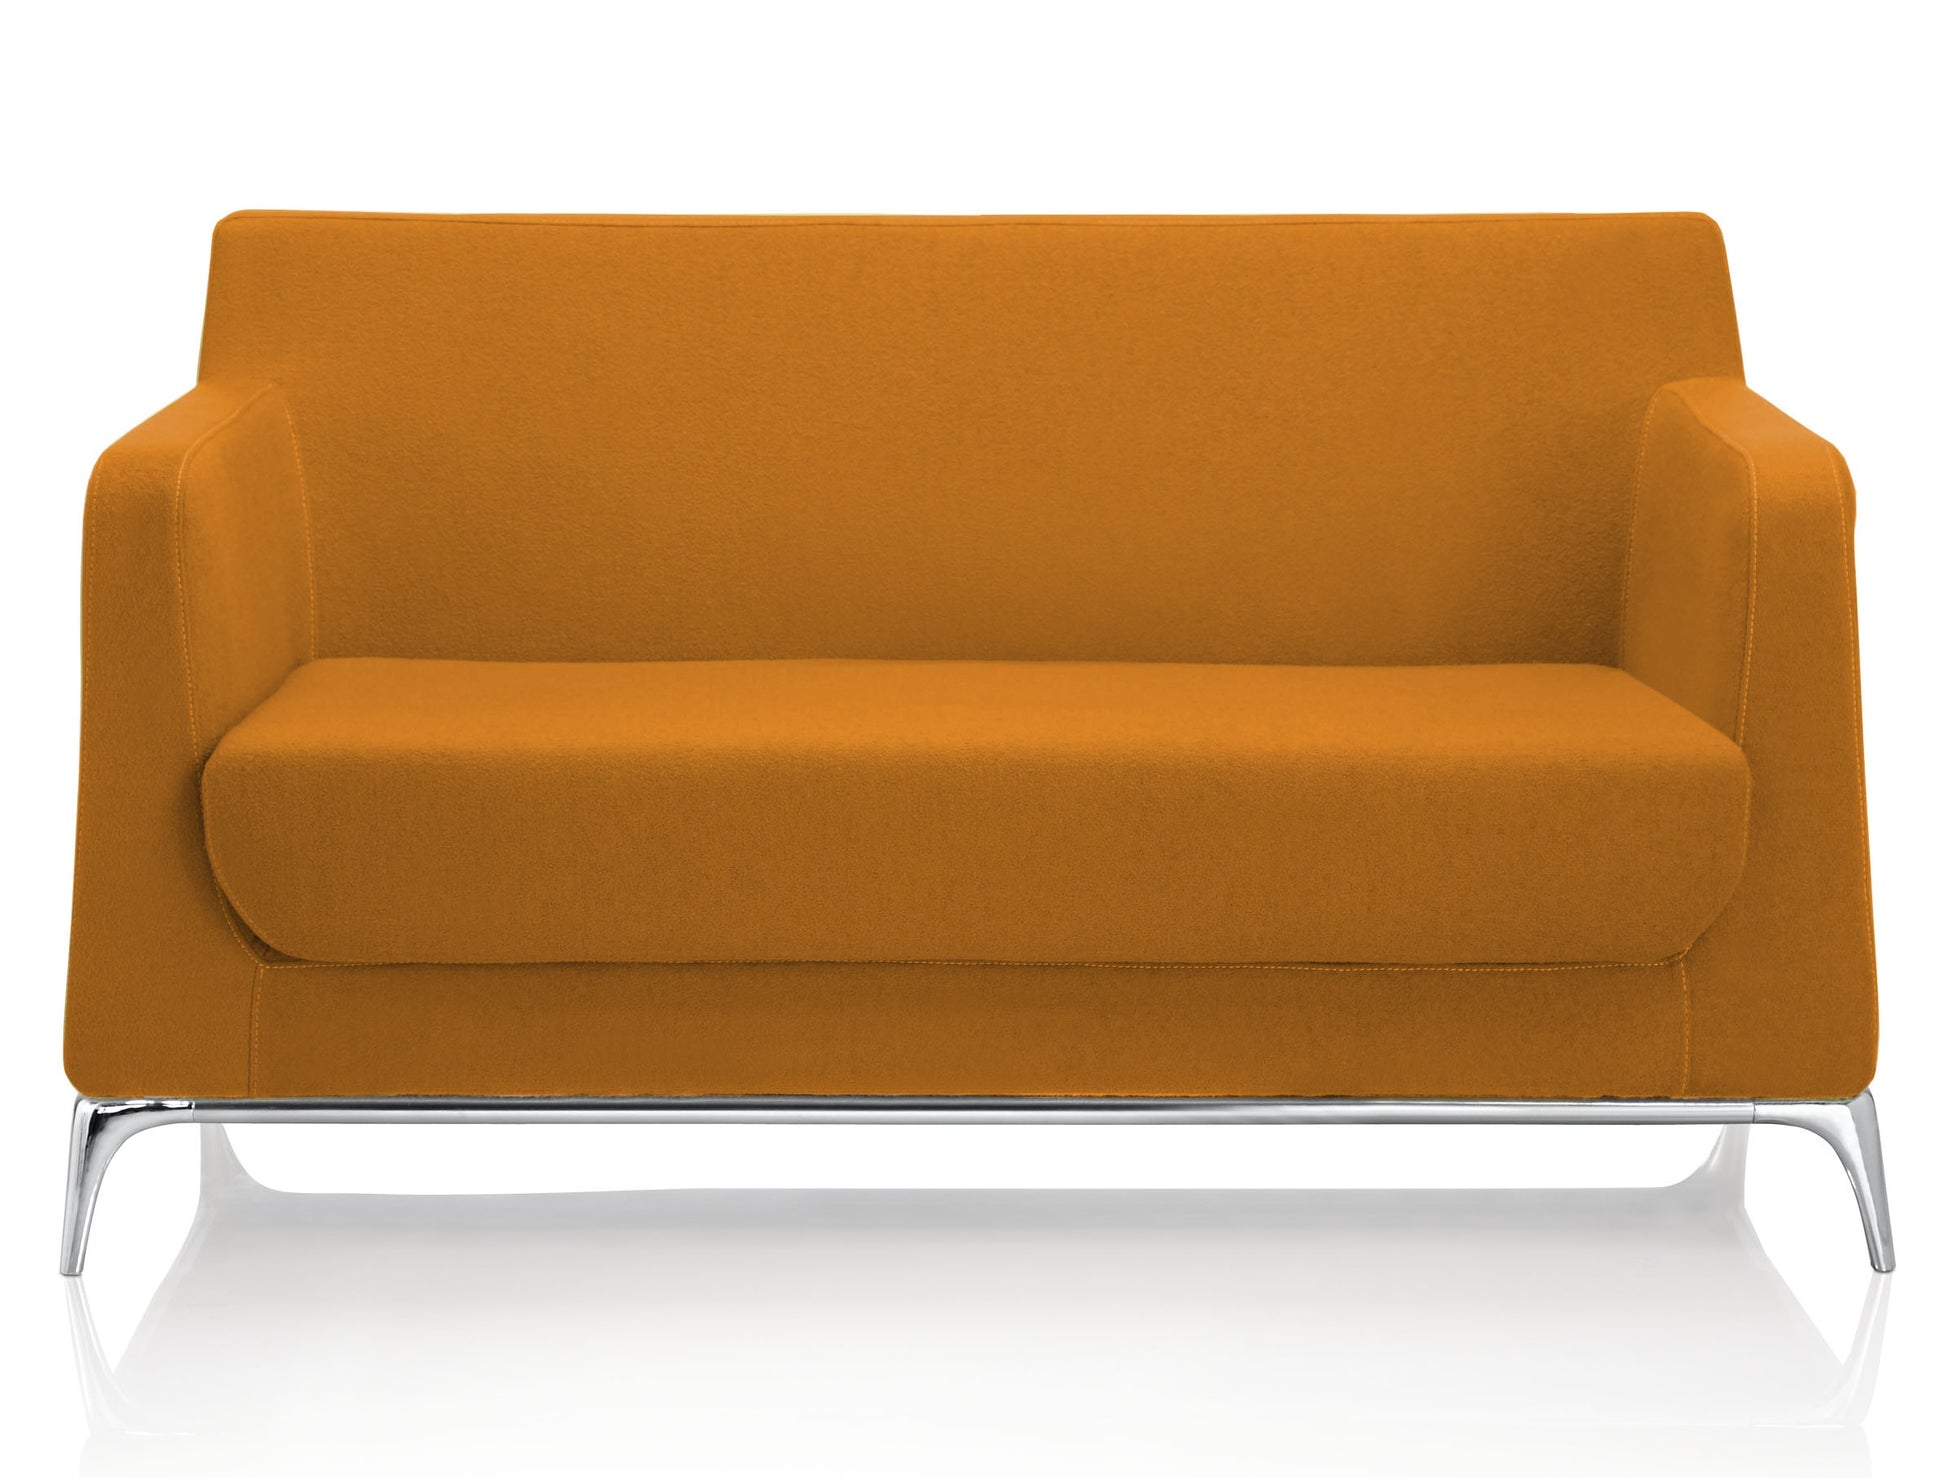 Bison 2 or 3-Seater Sofa - BAFCO